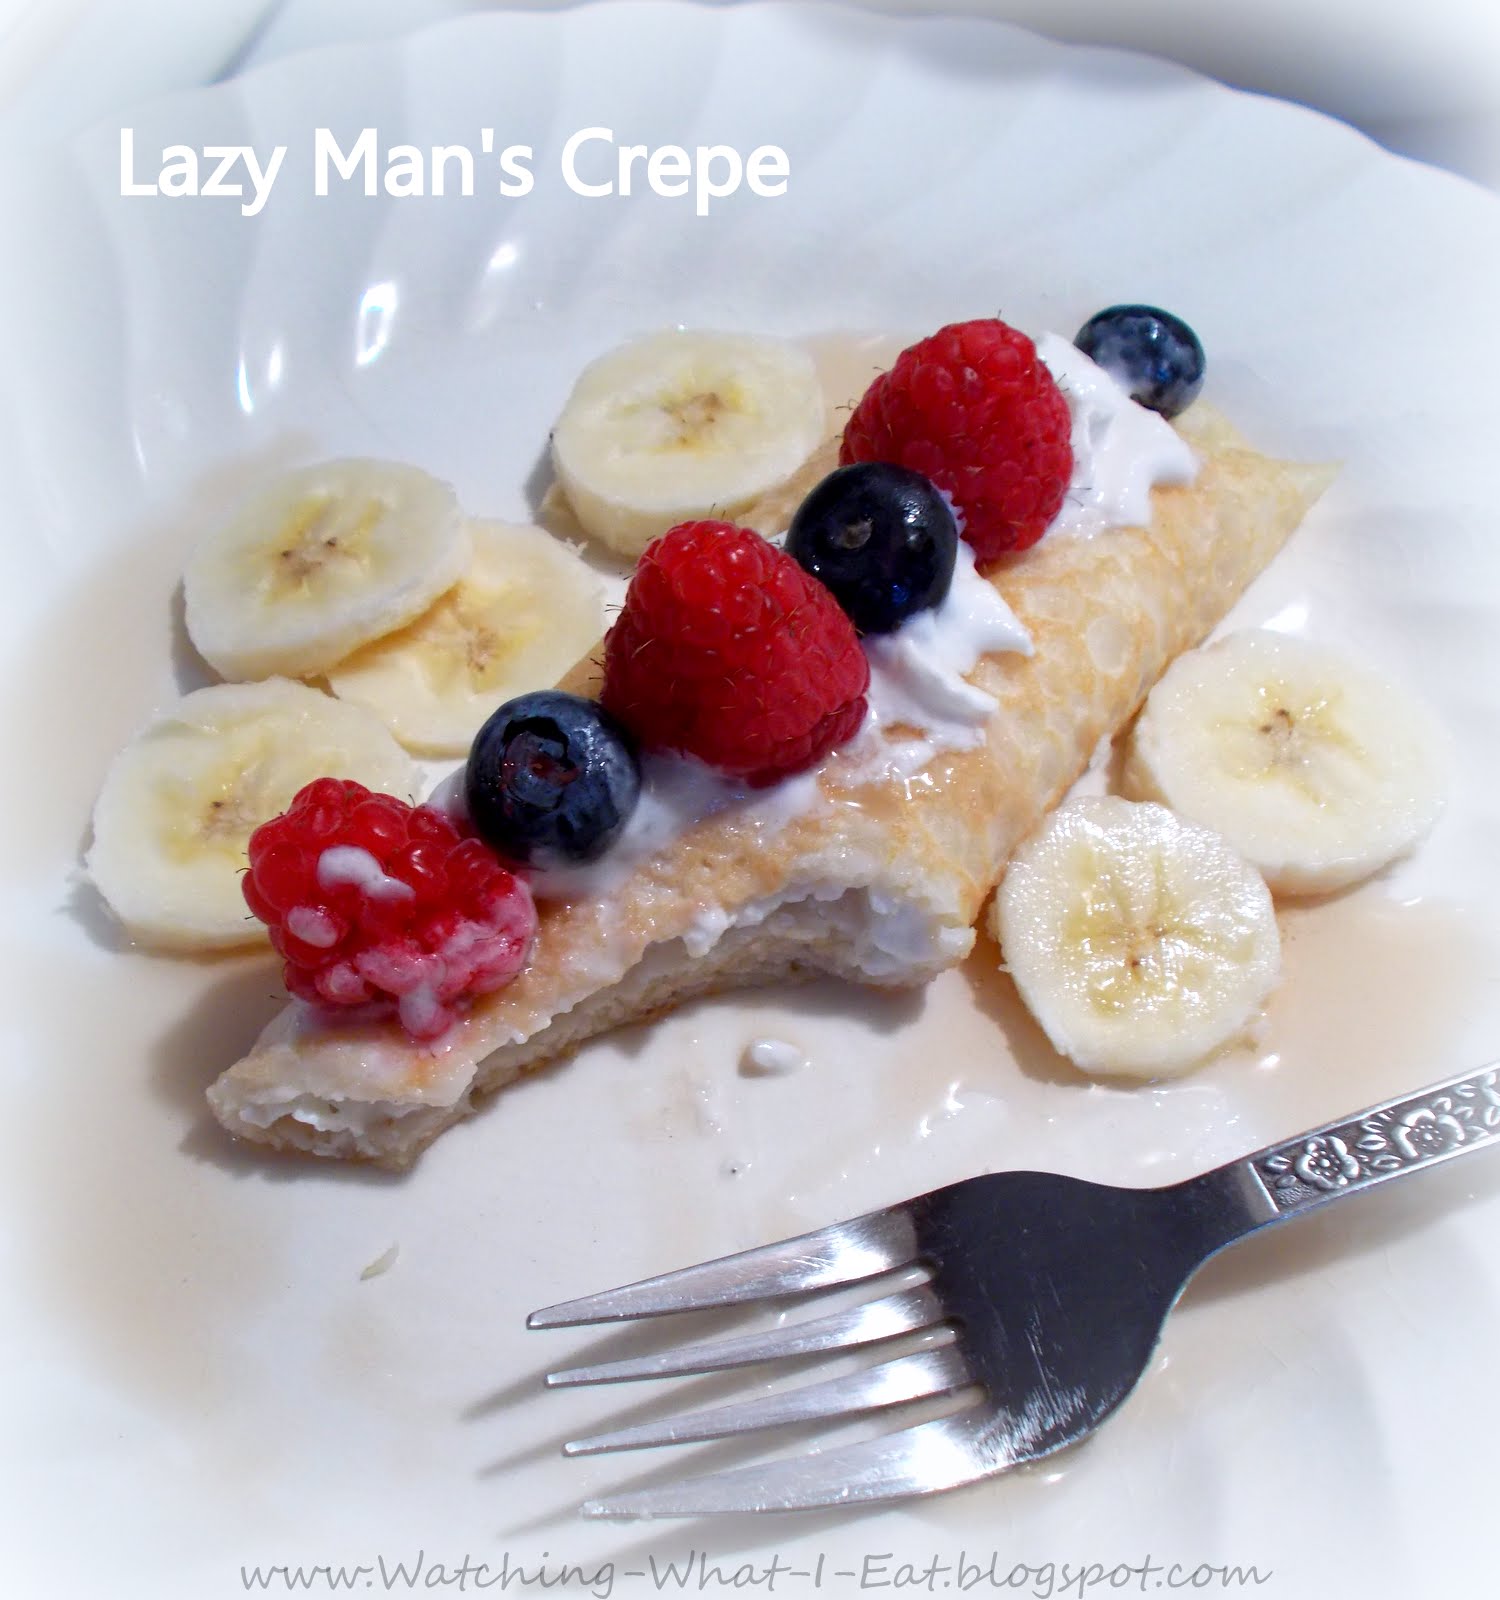 your way make simple pancake jazz  ~ a to crepes with morning Crepes Man's up mix to how pancake batter